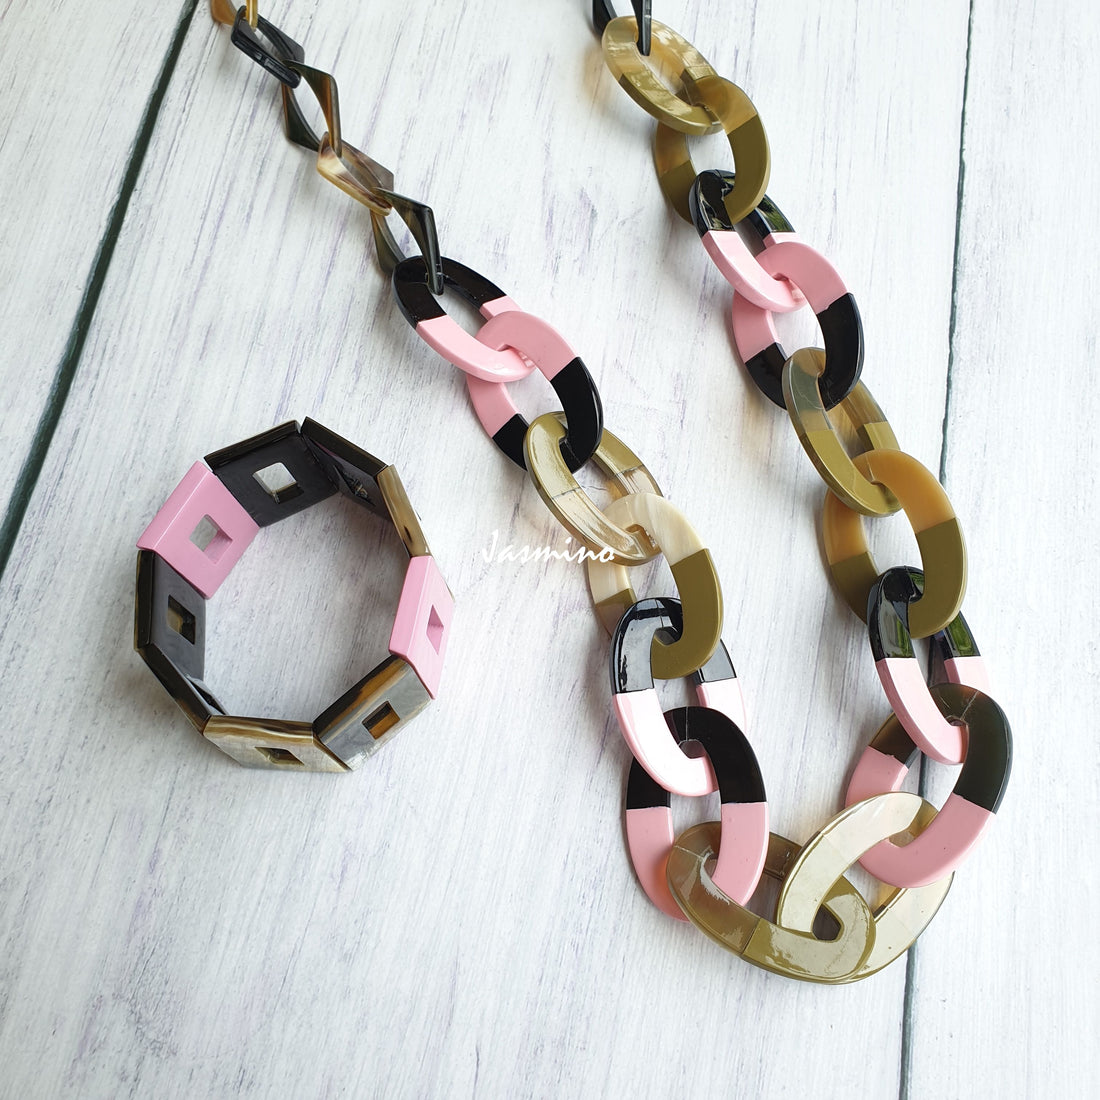 A set of Jasmino unique handmade Bohemian Vintage chain necklace and bangle bracelet featured black and pink in natural buffalo horn for women's gifts